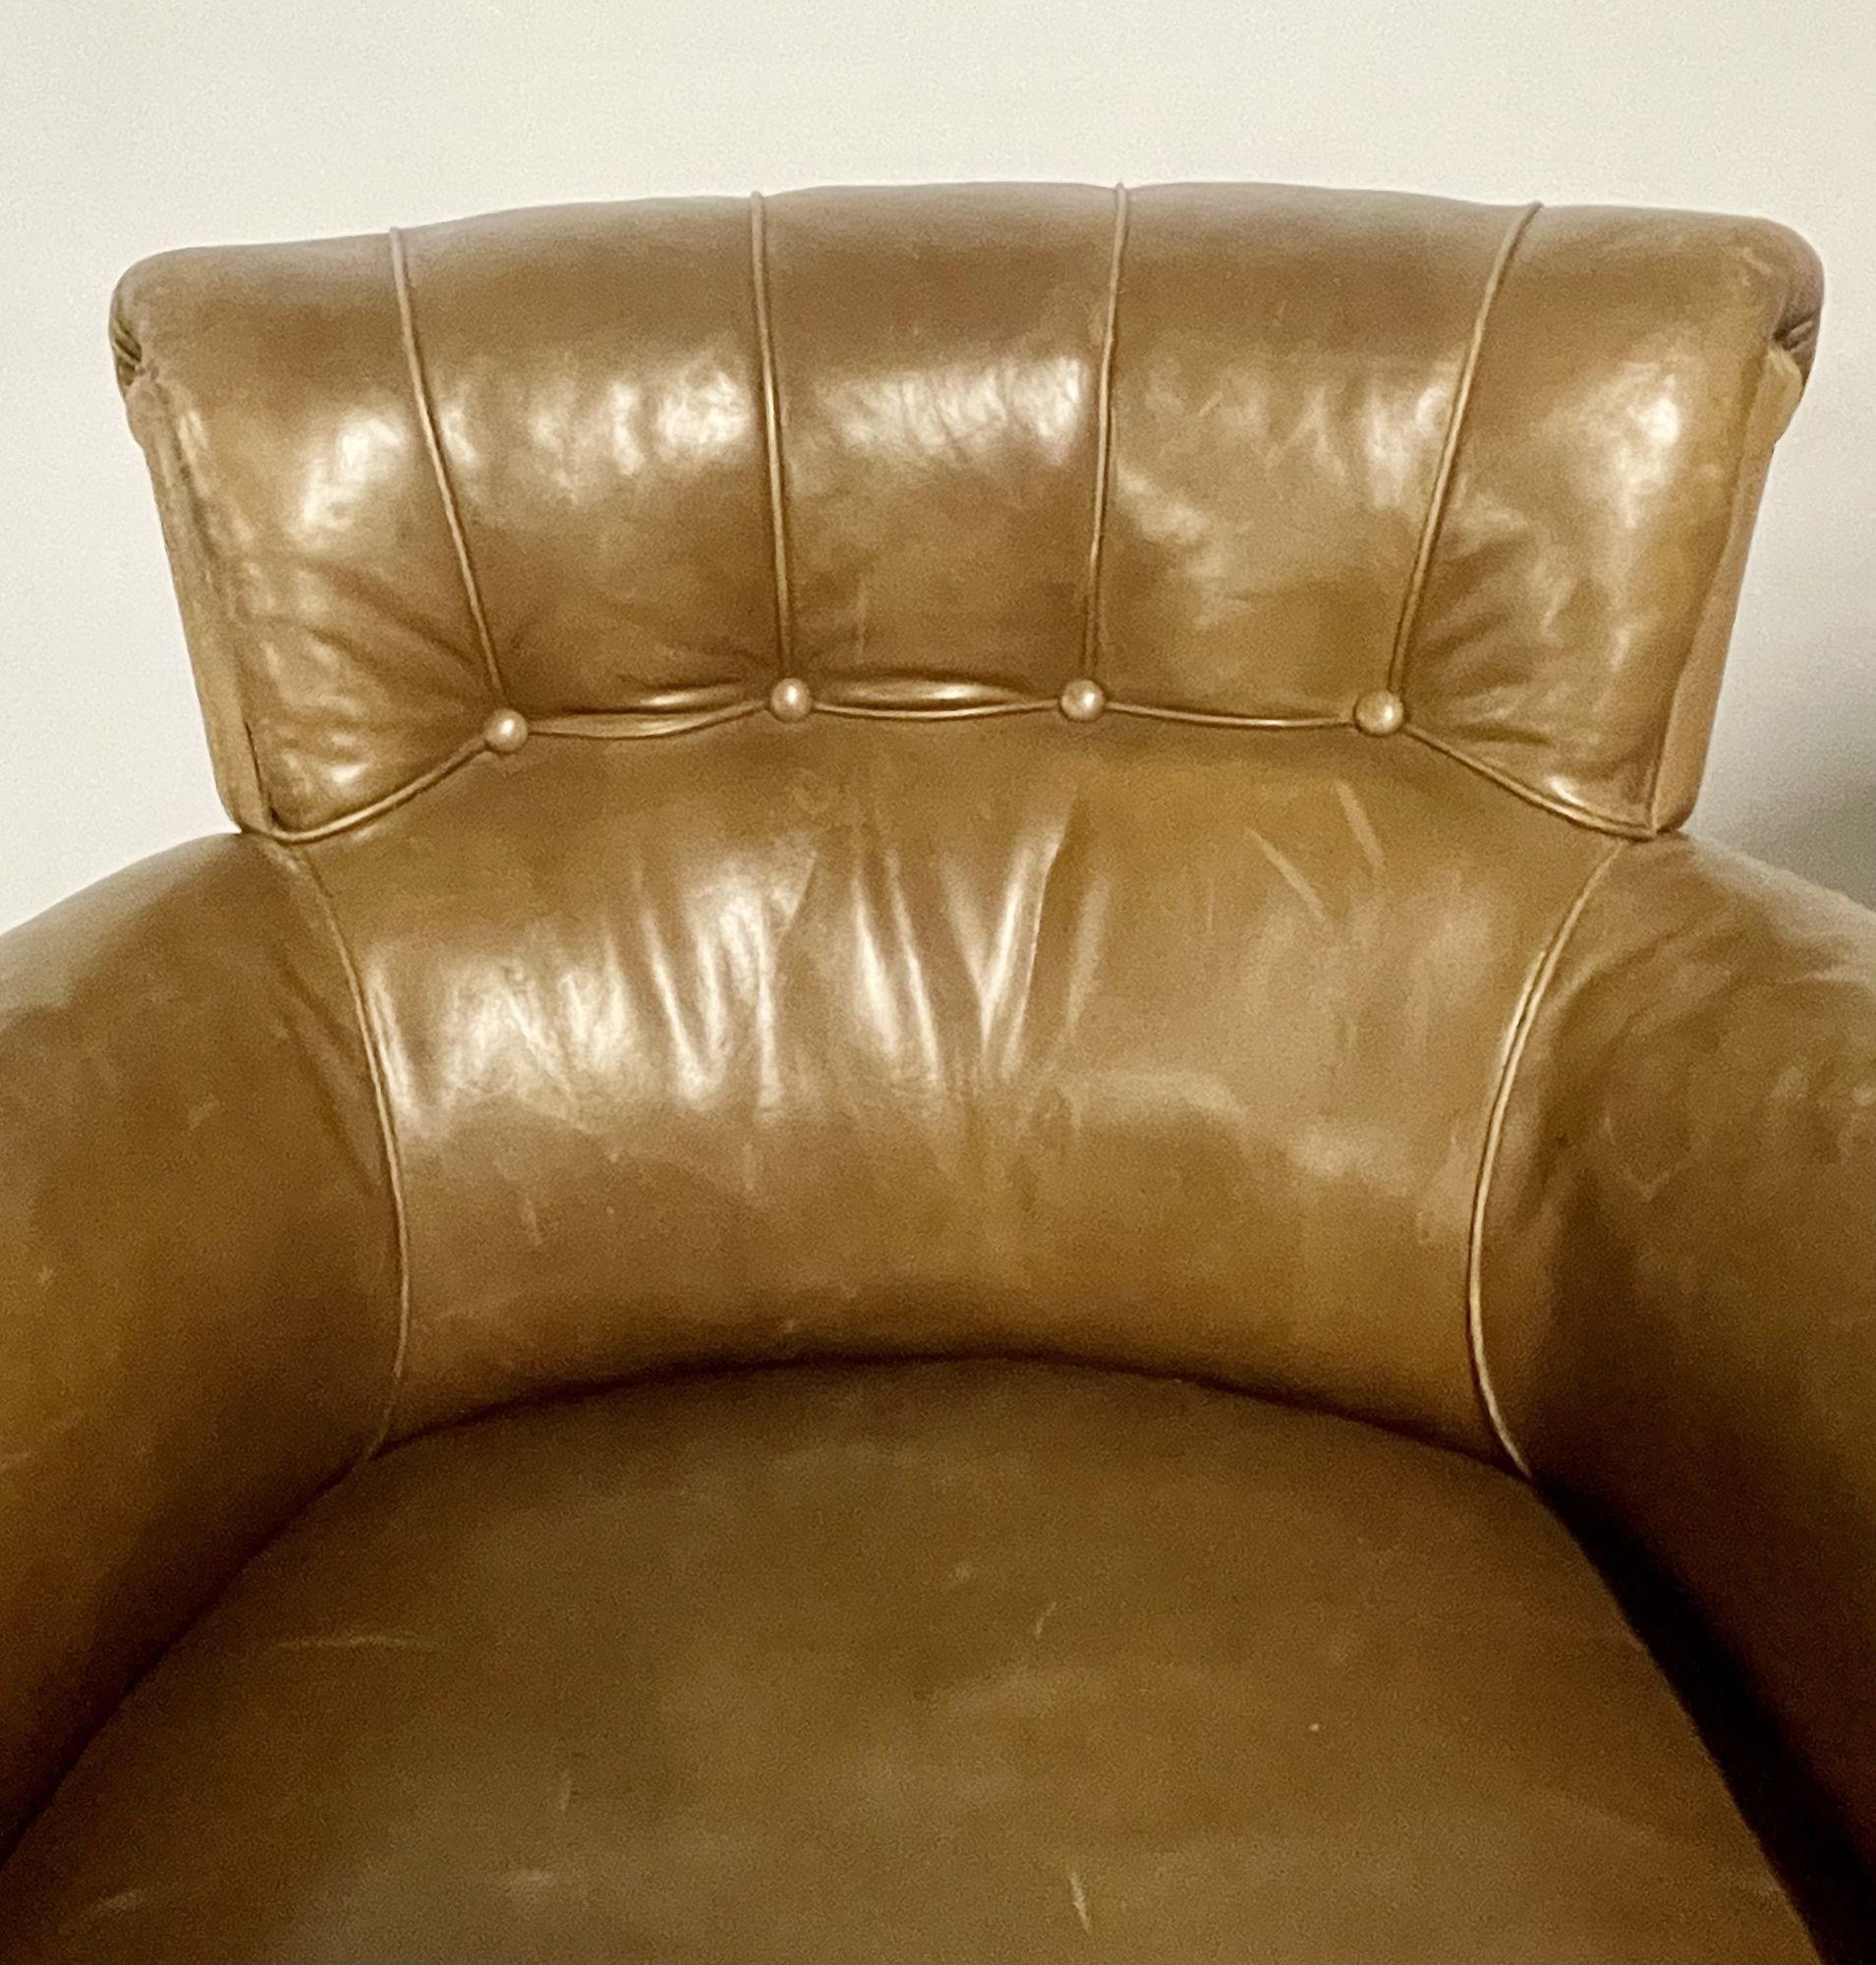 A pair of Georgian Tuffted leather club, lounge or cigar room Bergeres. Each in a fine worn brown leather on sprayed mahogany feet. The pair having a nice even aged worn look with button backs and oversized rolling arms. 
 
One chair with tear on